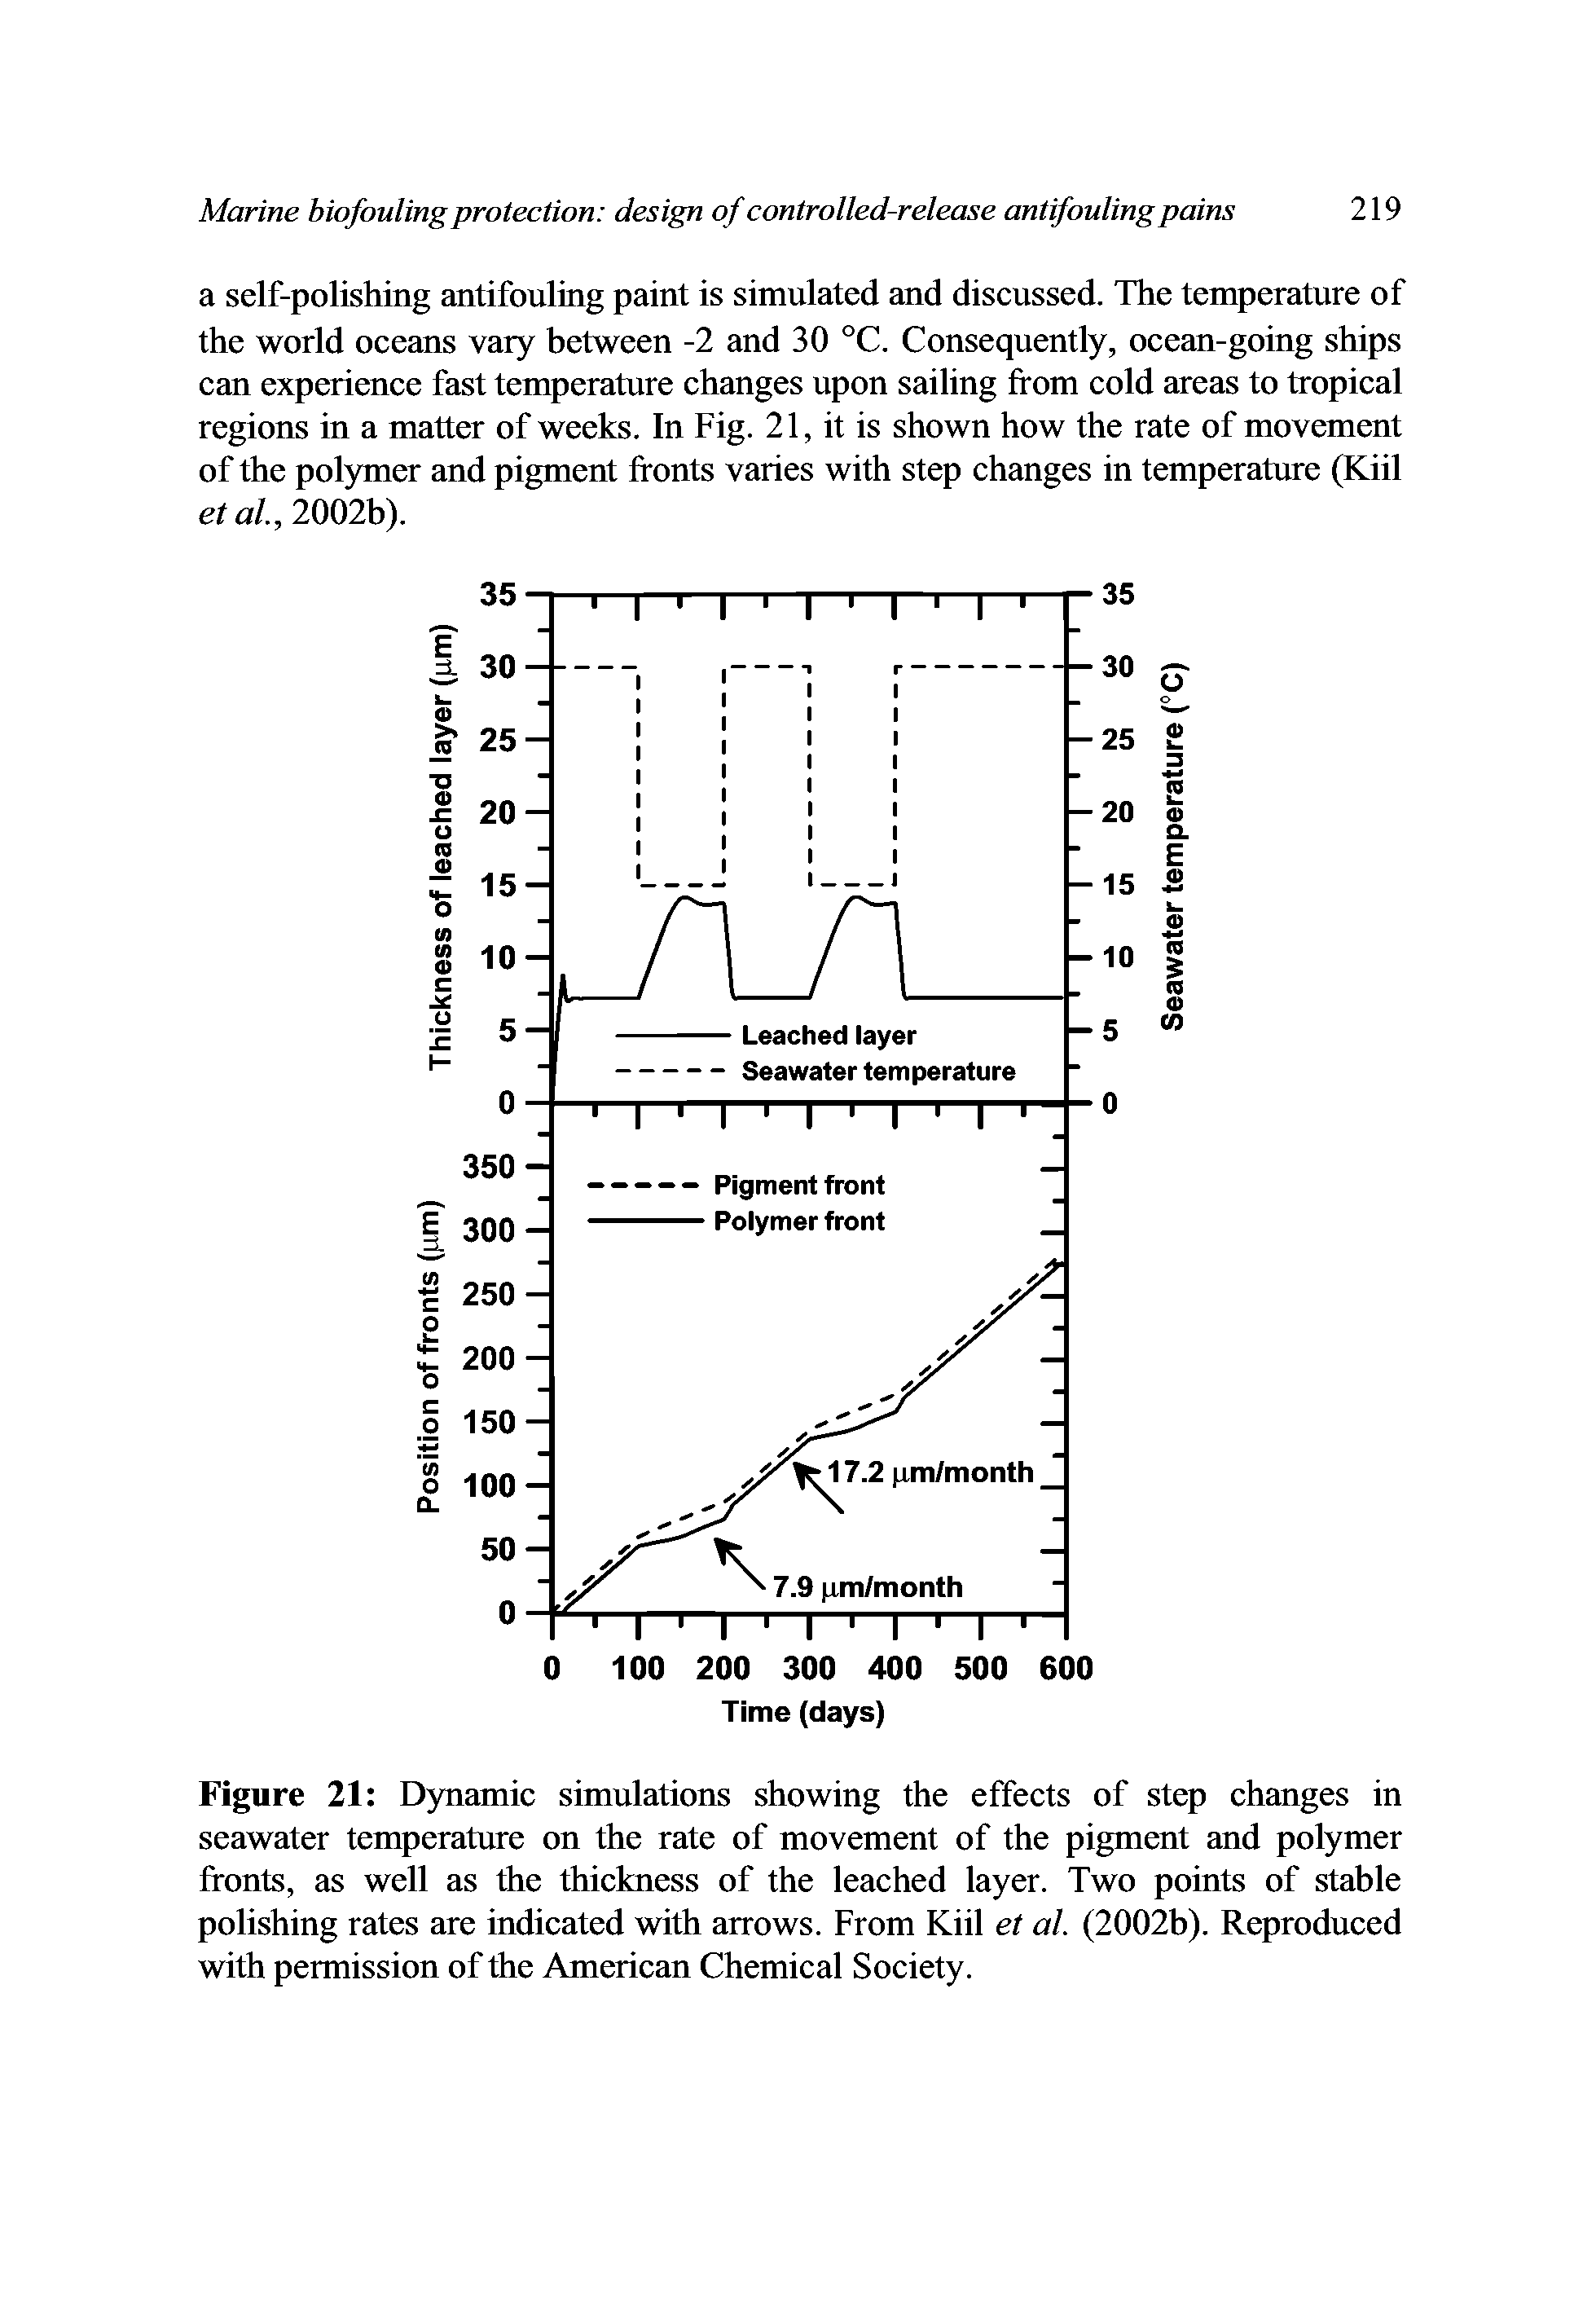 Figure 21 Dynamic simulations showing the effects of step changes in seawater temperature on the rate of movement of the pigment and polymer fronts, as well as the thickness of the leached layer. Two points of stable polishing rates are indicated with arrows. From Kiil et al. (2002b). Reproduced with permission of the American Chemical Society.